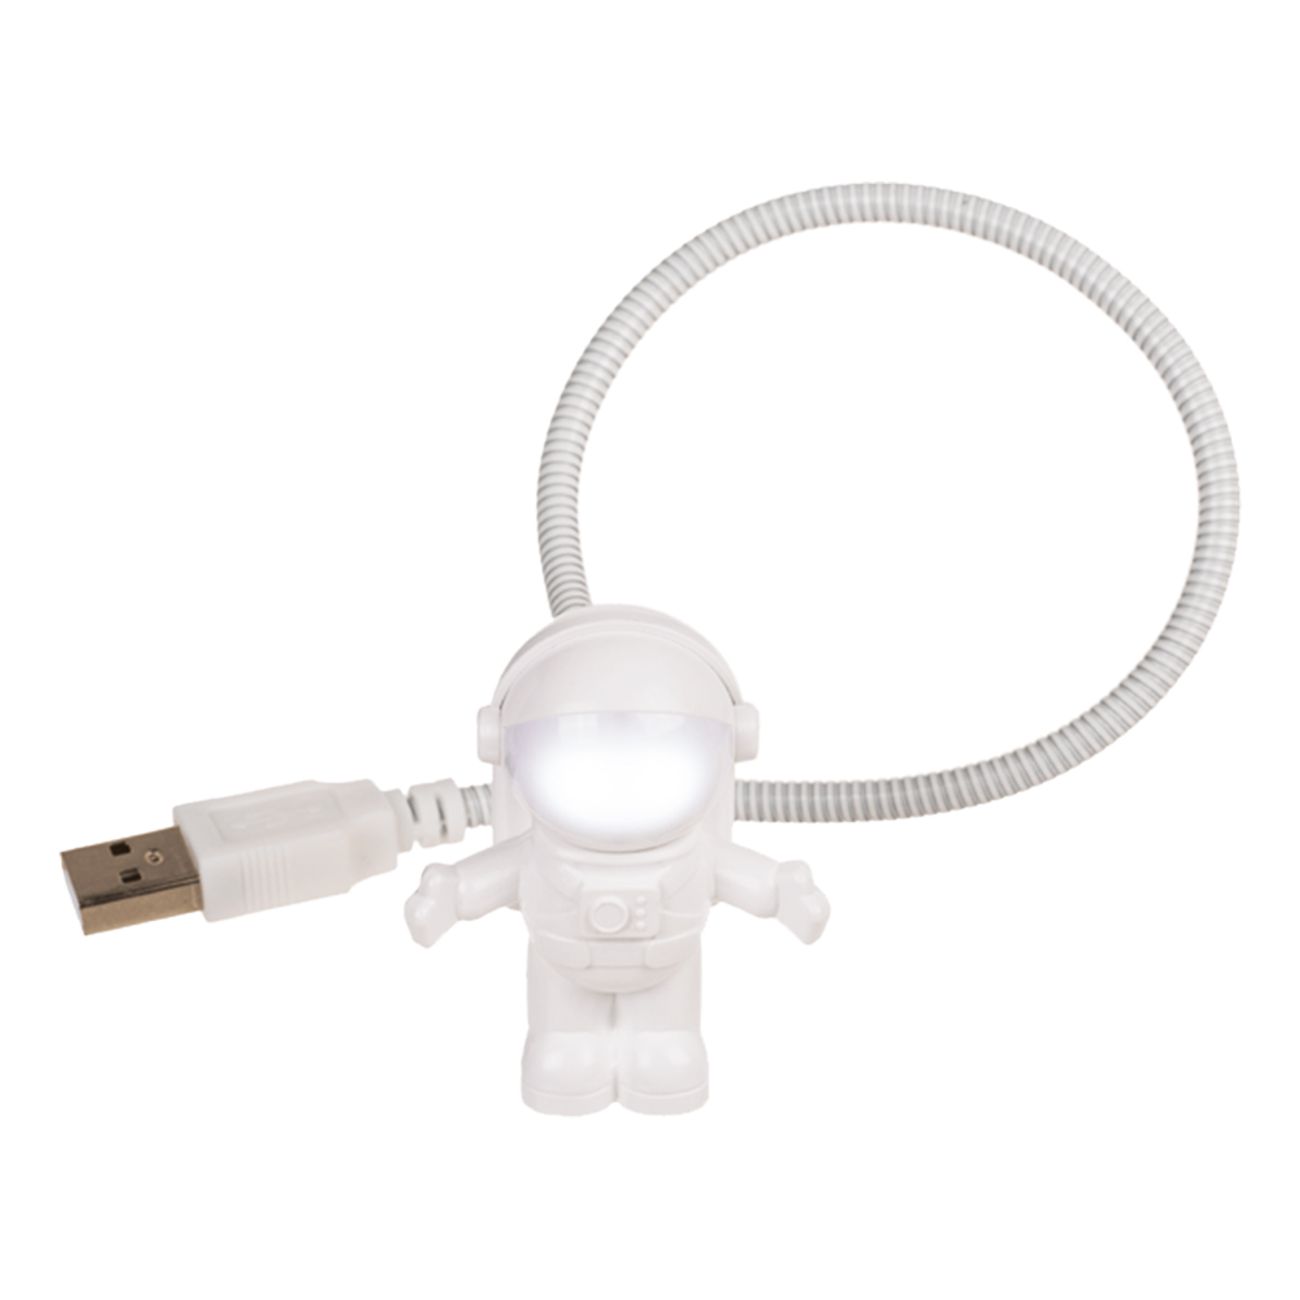 usb-led-astronaut-ca-7-x-335-cm-with-usb-cable--in-gift-box-100136-2